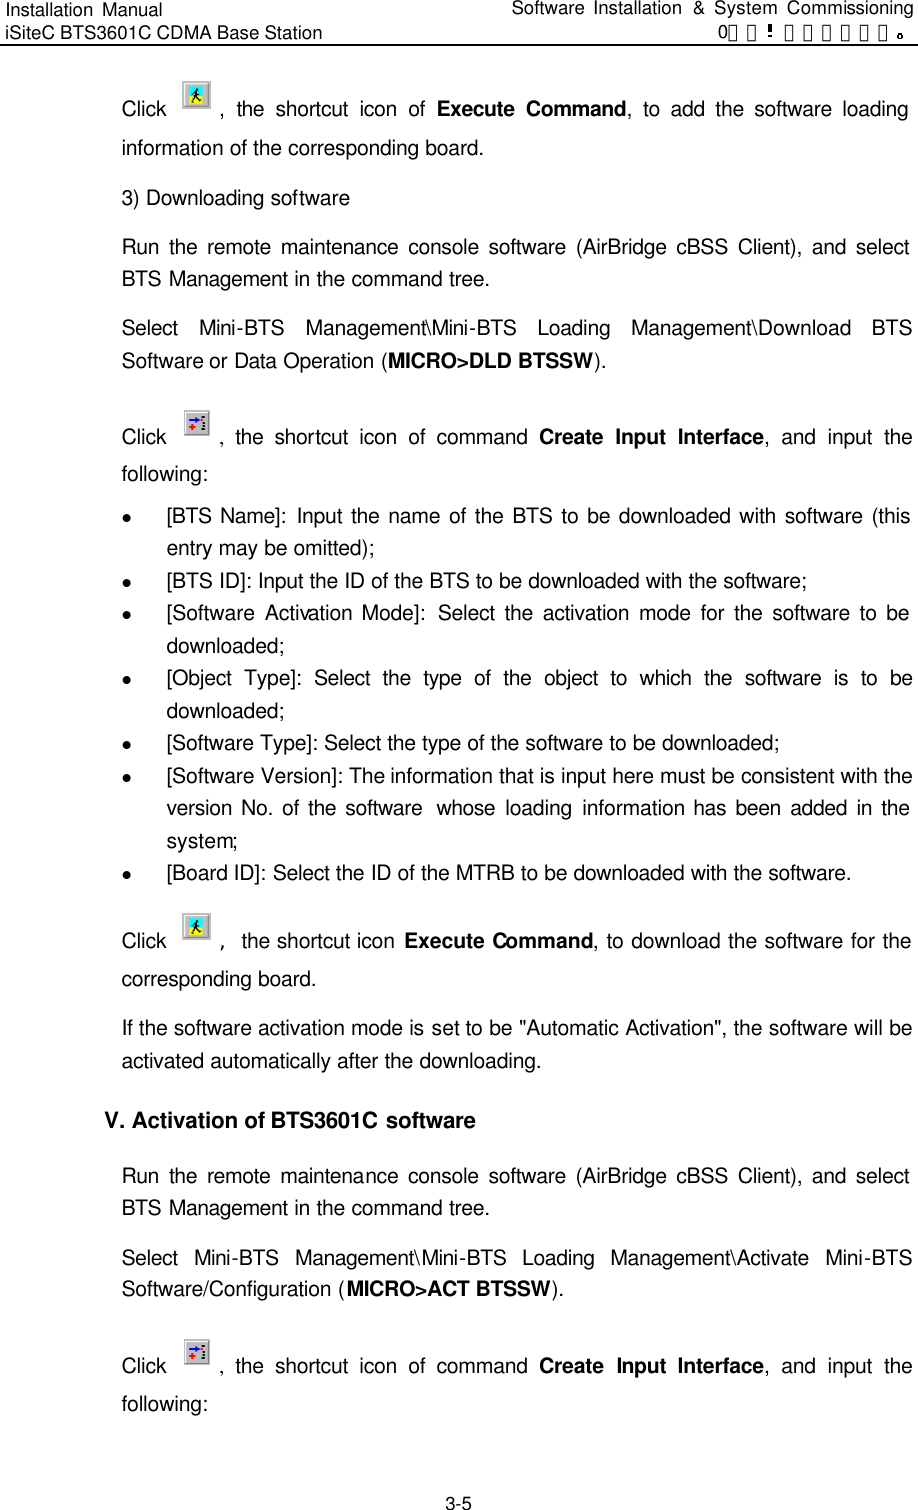 Installation Manual   iSiteC BTS3601C CDMA Base Station Software Installation &amp; System Commissioning 0错误 表格结果无效  3-5 Click  , the shortcut icon of Execute Command, to add the software loading information of the corresponding board.   3) Downloading software   Run the remote maintenance console software (AirBridge cBSS Client), and select BTS Management in the command tree.   Select  Mini-BTS Management\Mini-BTS Loading Management\Download BTS Software or Data Operation (MICRO&gt;DLD BTSSW).   Click  , the shortcut icon of command Create Input Interface, and input the following:   l [BTS Name]: Input the name of the BTS to be downloaded with software (this entry may be omitted);   l [BTS ID]: Input the ID of the BTS to be downloaded with the software;   l [Software Activation Mode]:  Select the activation mode for the software to be downloaded;   l [Object Type]: Select the type of the object to which the software is to be downloaded;   l [Software Type]: Select the type of the software to be downloaded;   l [Software Version]: The information that is input here must be consistent with the version No. of the software  whose  loading information has been added in the system;   l [Board ID]: Select the ID of the MTRB to be downloaded with the software.   Click  ，　the shortcut icon Execute Command, to download the software for the corresponding board. If the software activation mode is set to be &quot;Automatic Activation&quot;, the software will be activated automatically after the downloading.   V. Activation of BTS3601C software 　Run the remote maintenance console software (AirBridge cBSS Client), and select BTS Management in the command tree.   Select  Mini-BTS Management\Mini-BTS Loading Management\Activate Mini-BTS Software/Configuration (MICRO&gt;ACT BTSSW).   Click  , the shortcut icon of command Create Input Interface, and input the following:   